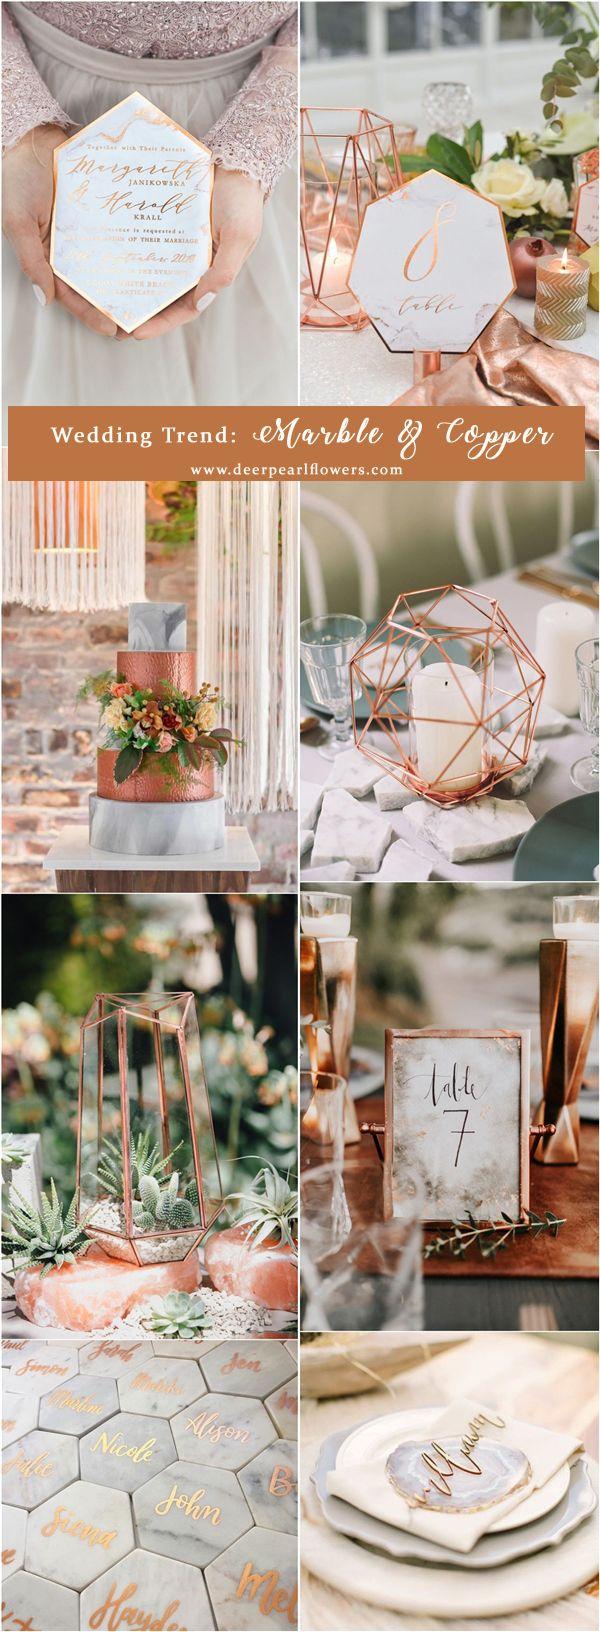 Hochzeit - Top 6 Wedding Trends For 2018 You’ll Love